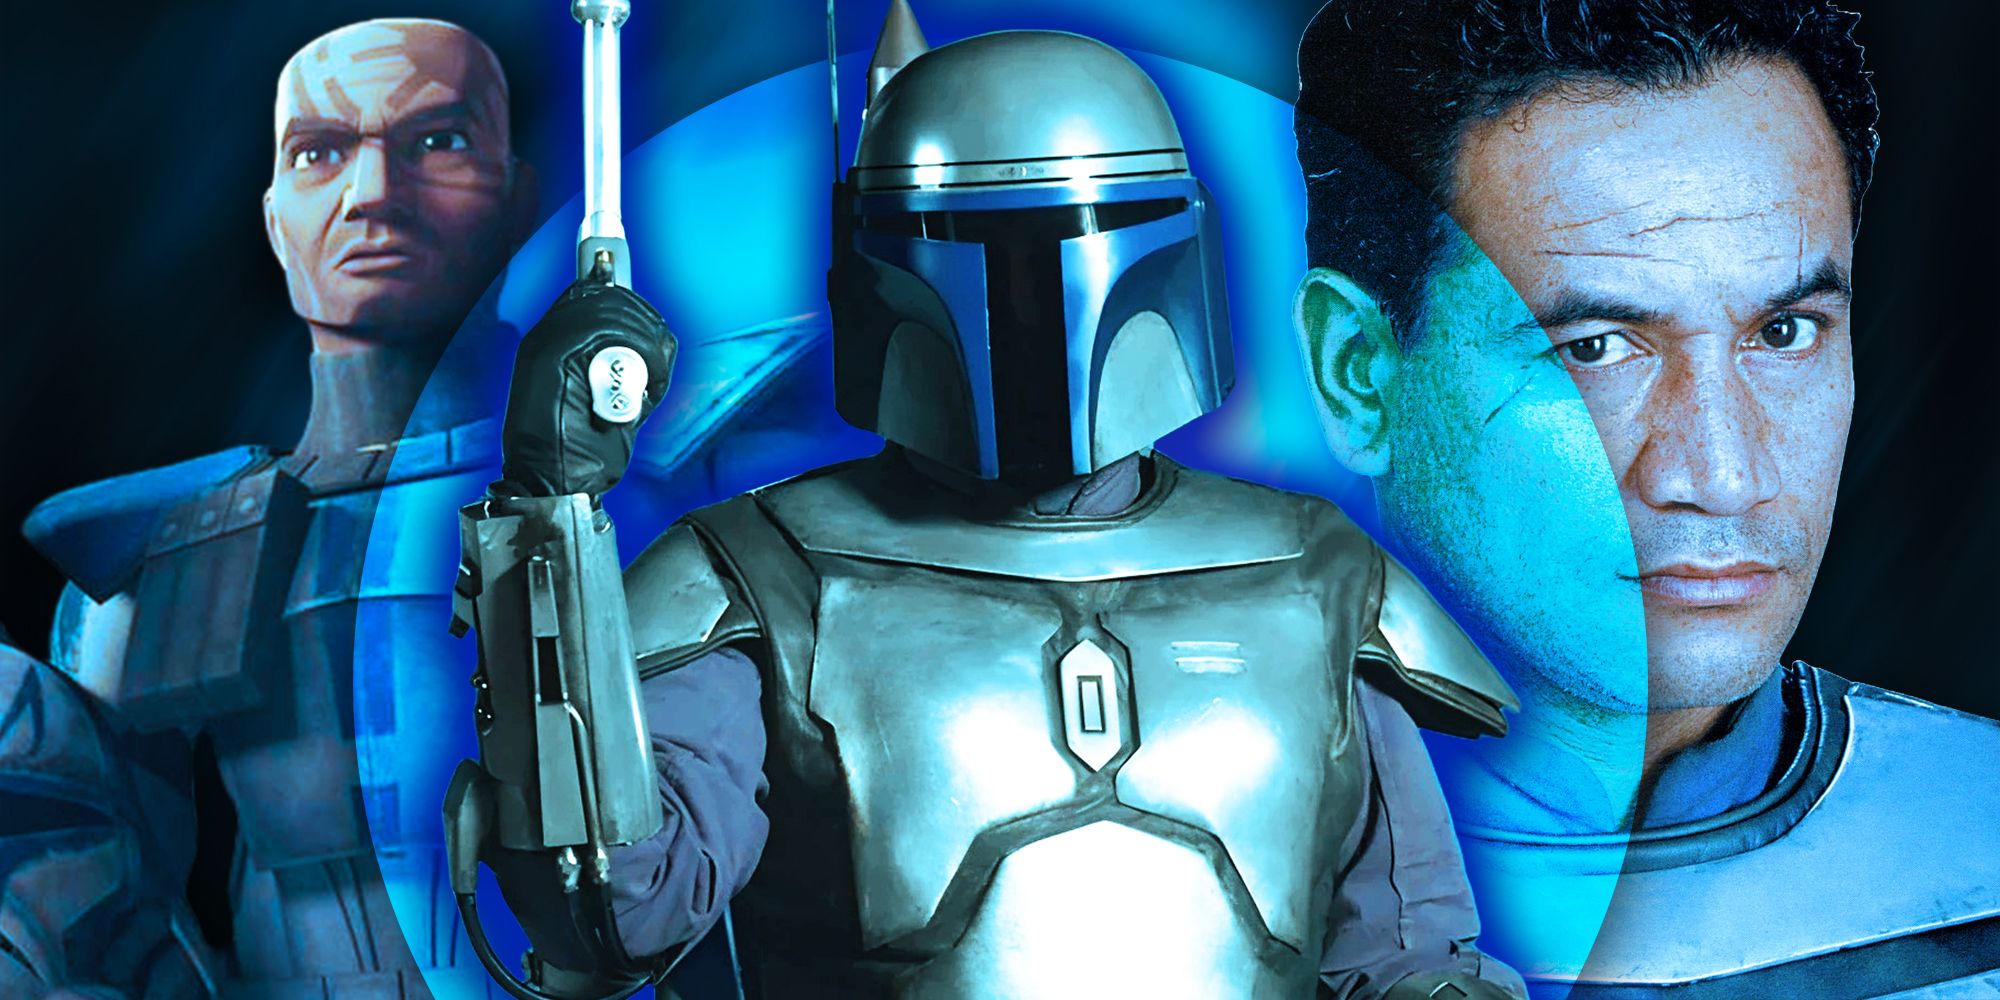 Temuera Morrison's Jango Fett in Attack of the Clones, suited and helmetless, edited with the clone Jesse